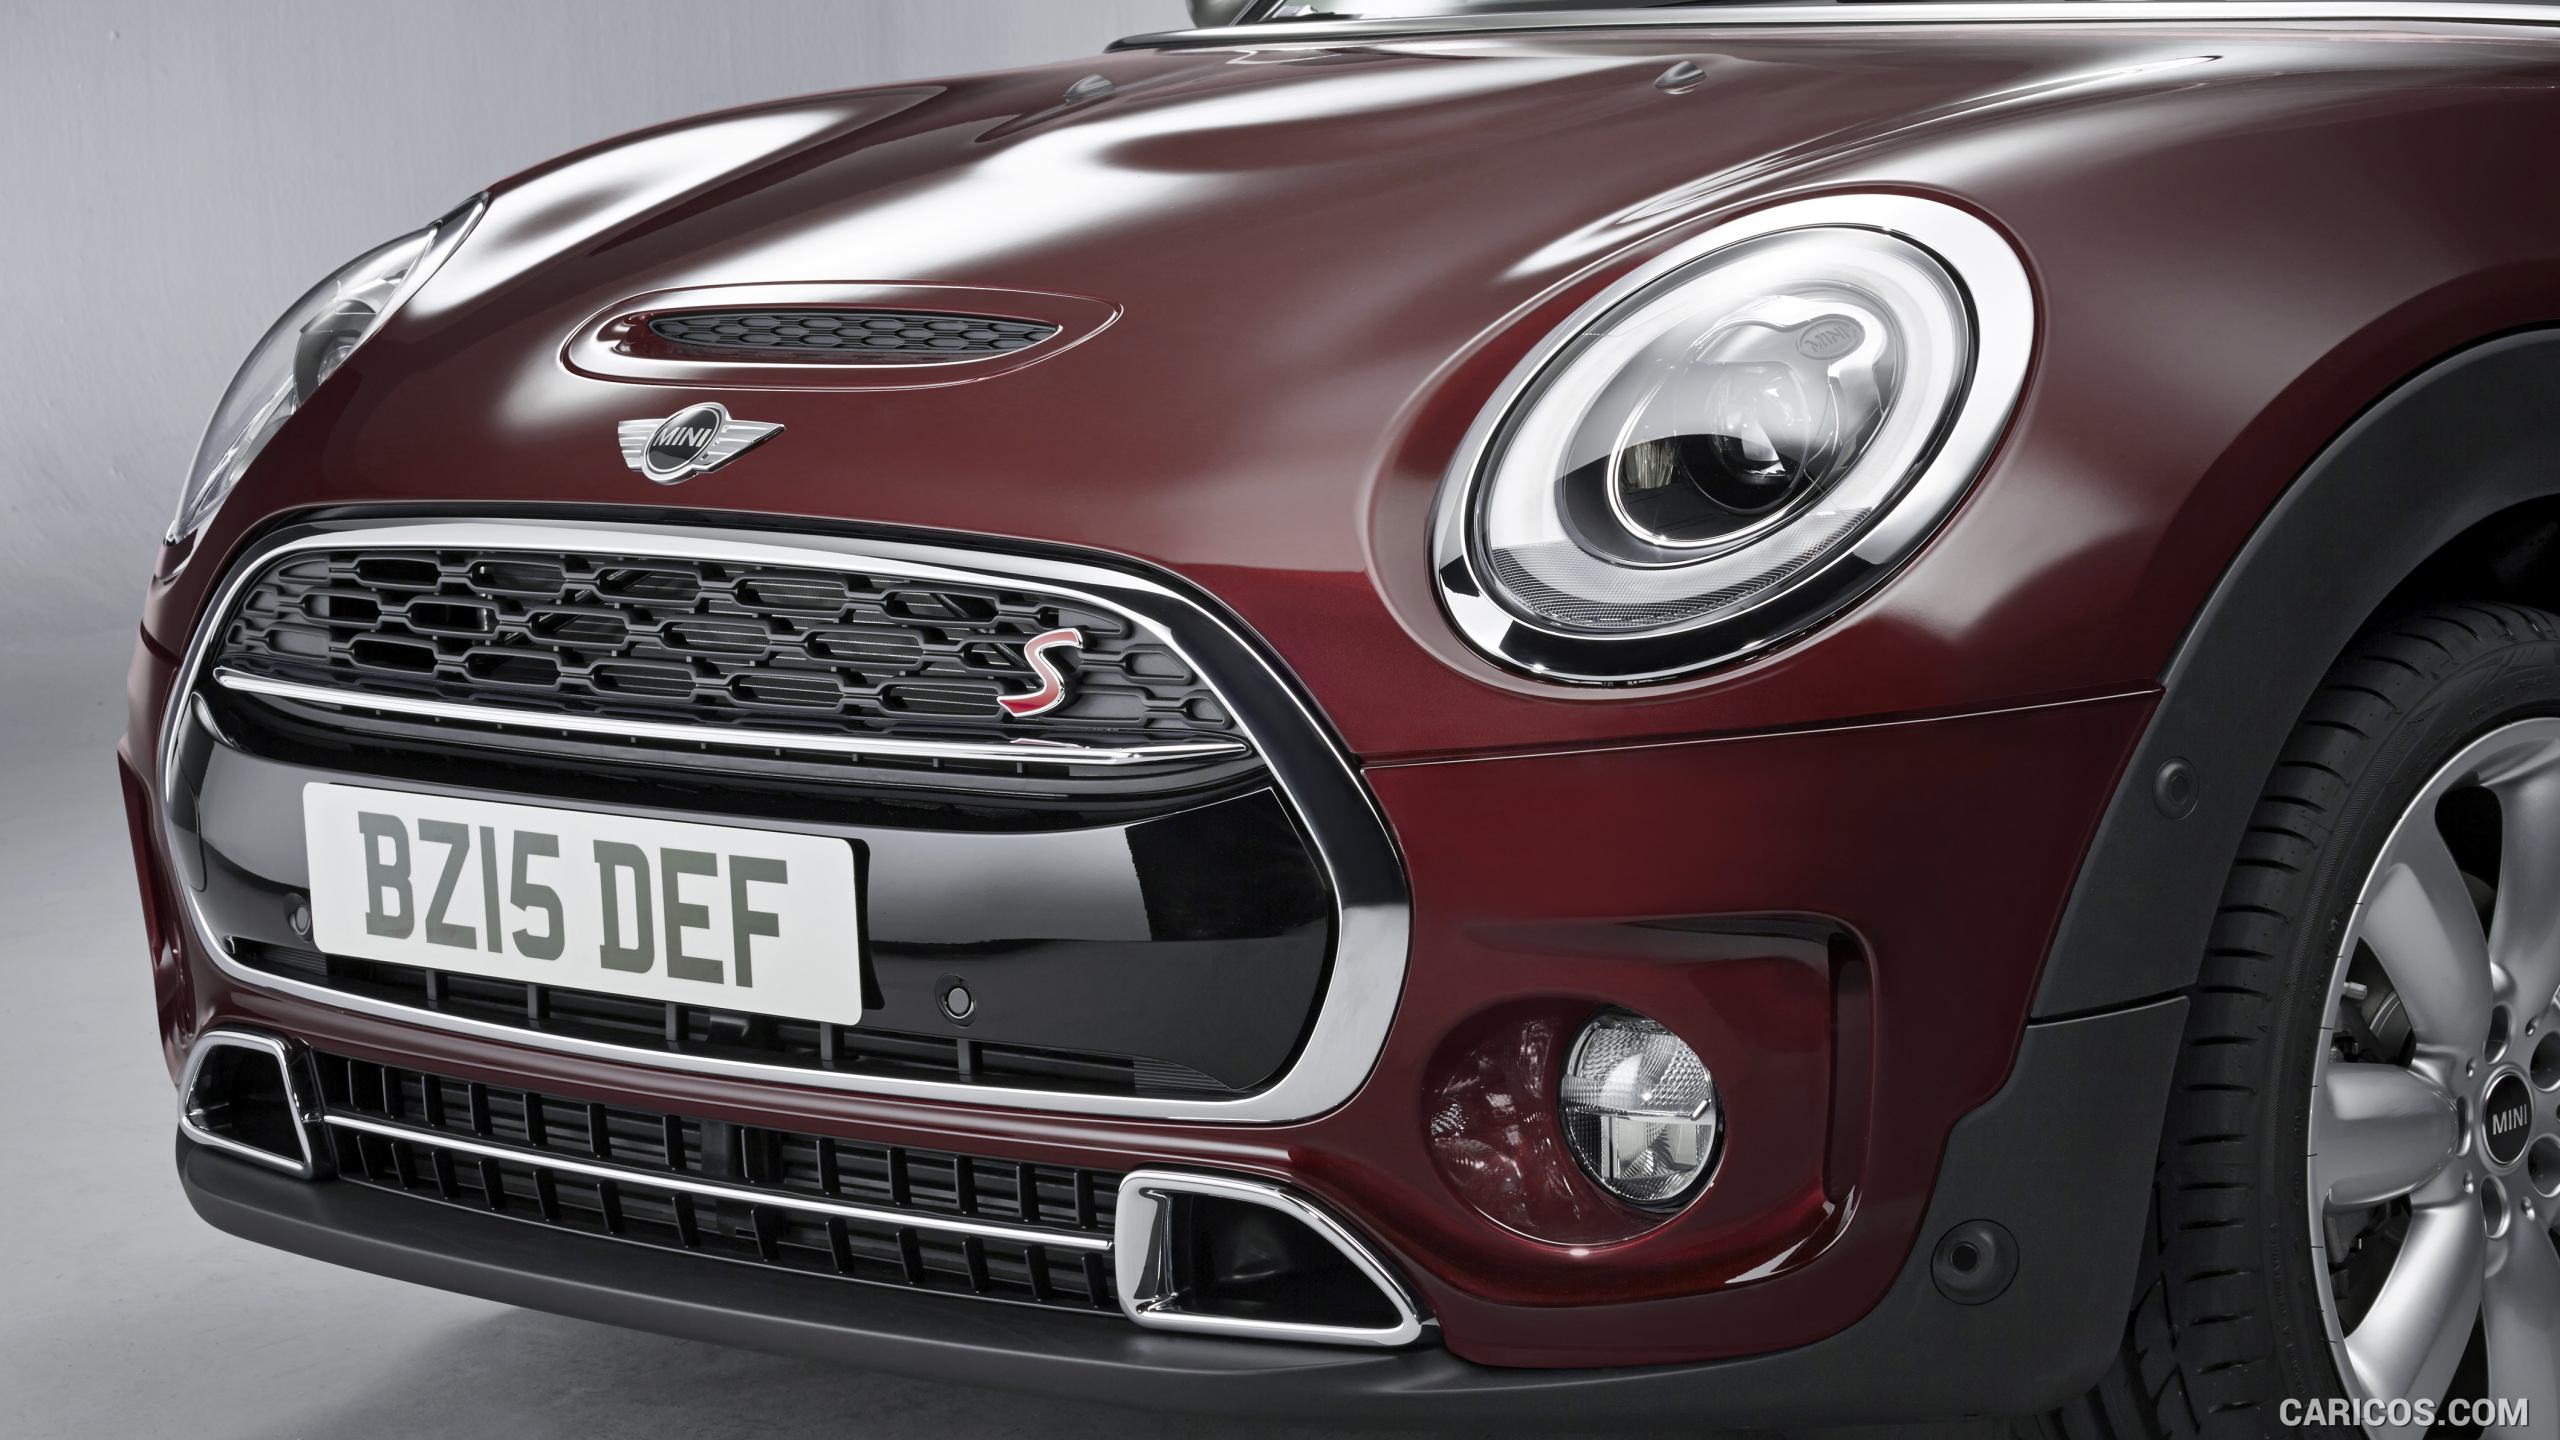 2016 MINI Clubman S - Front, #19 of 380